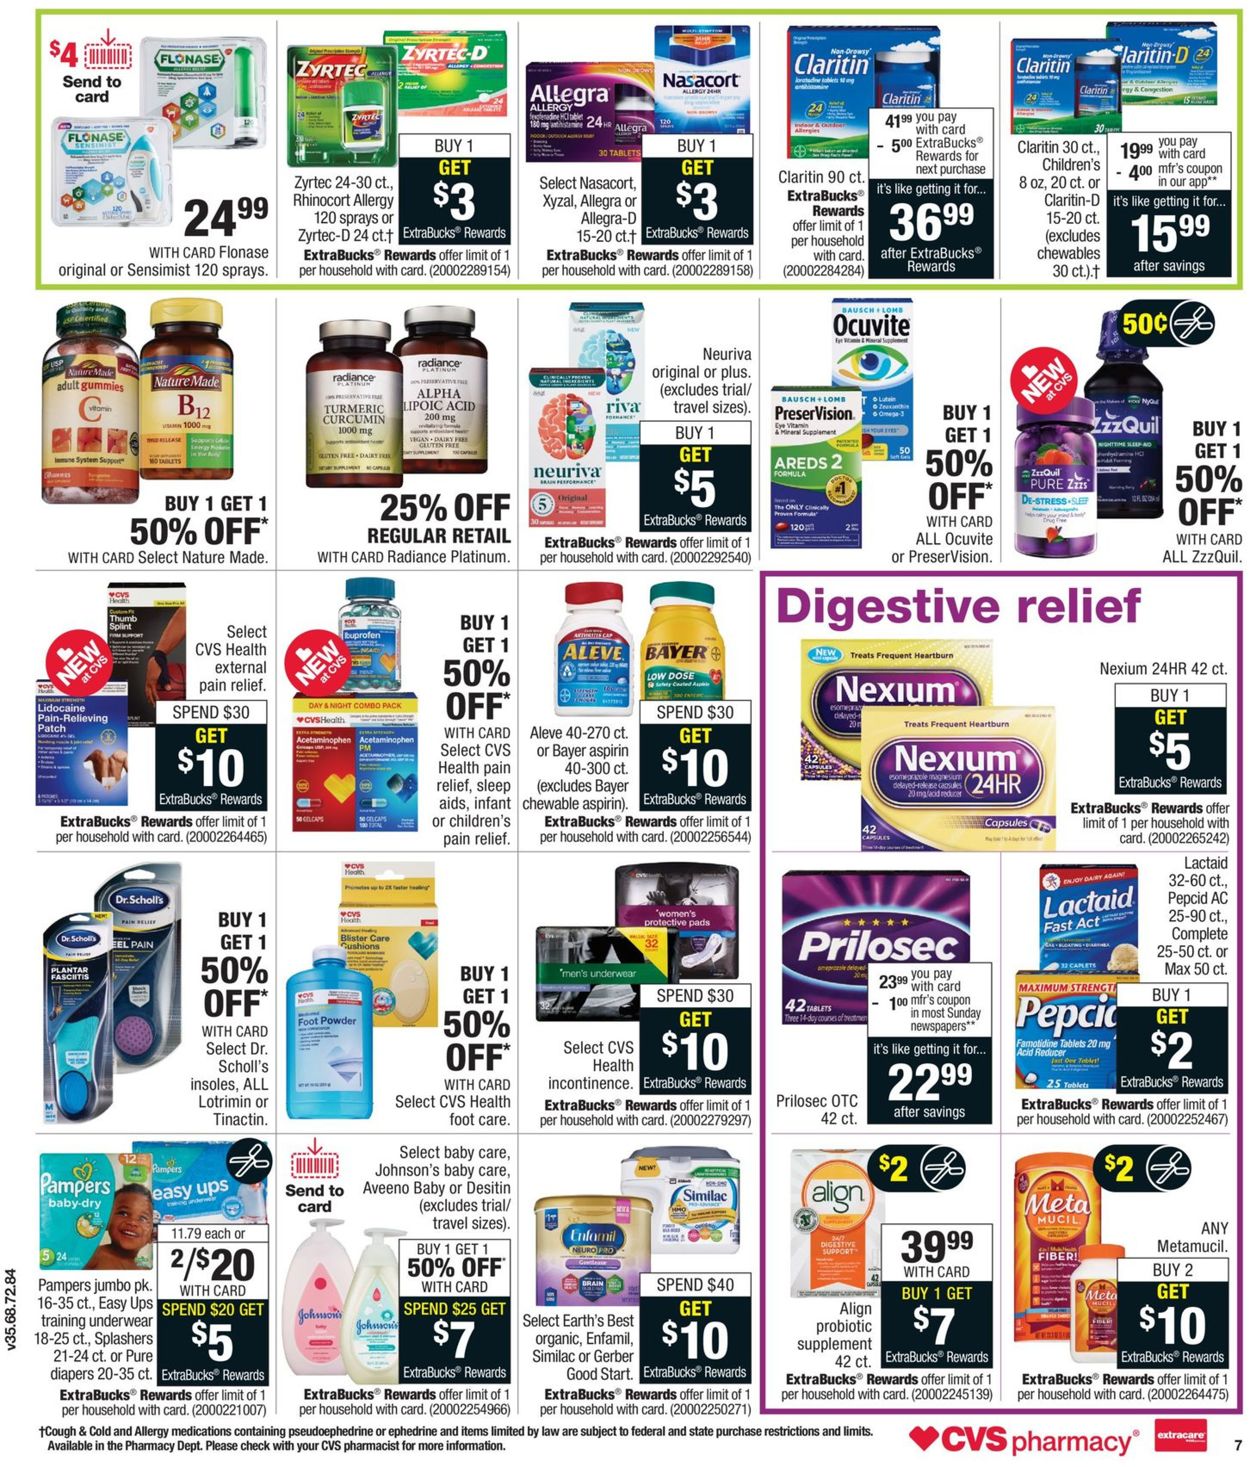 CVS Pharmacy Current weekly ad 05/26 06/01/2019 [11]